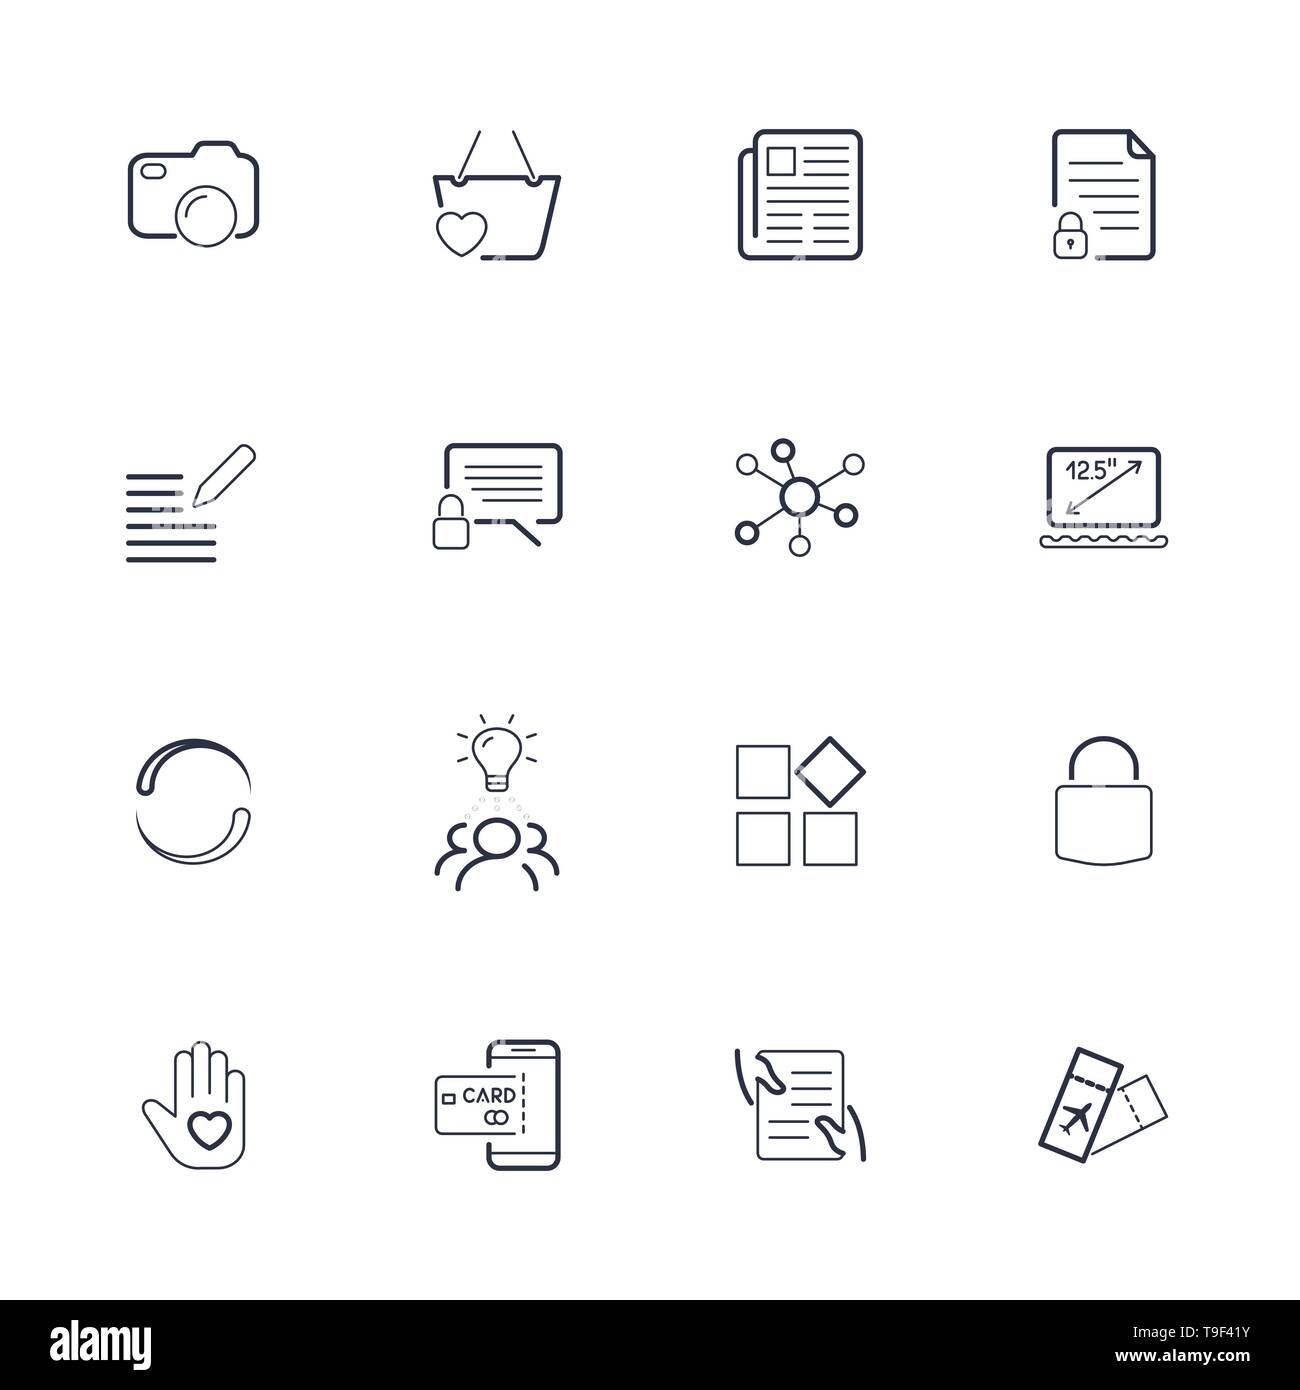 Different simple icons for web, sites, app. Icons set with thin line: camera, newspaper, tiket, atm, card, lock, laptop, comment, contract. Editable Stock Vector